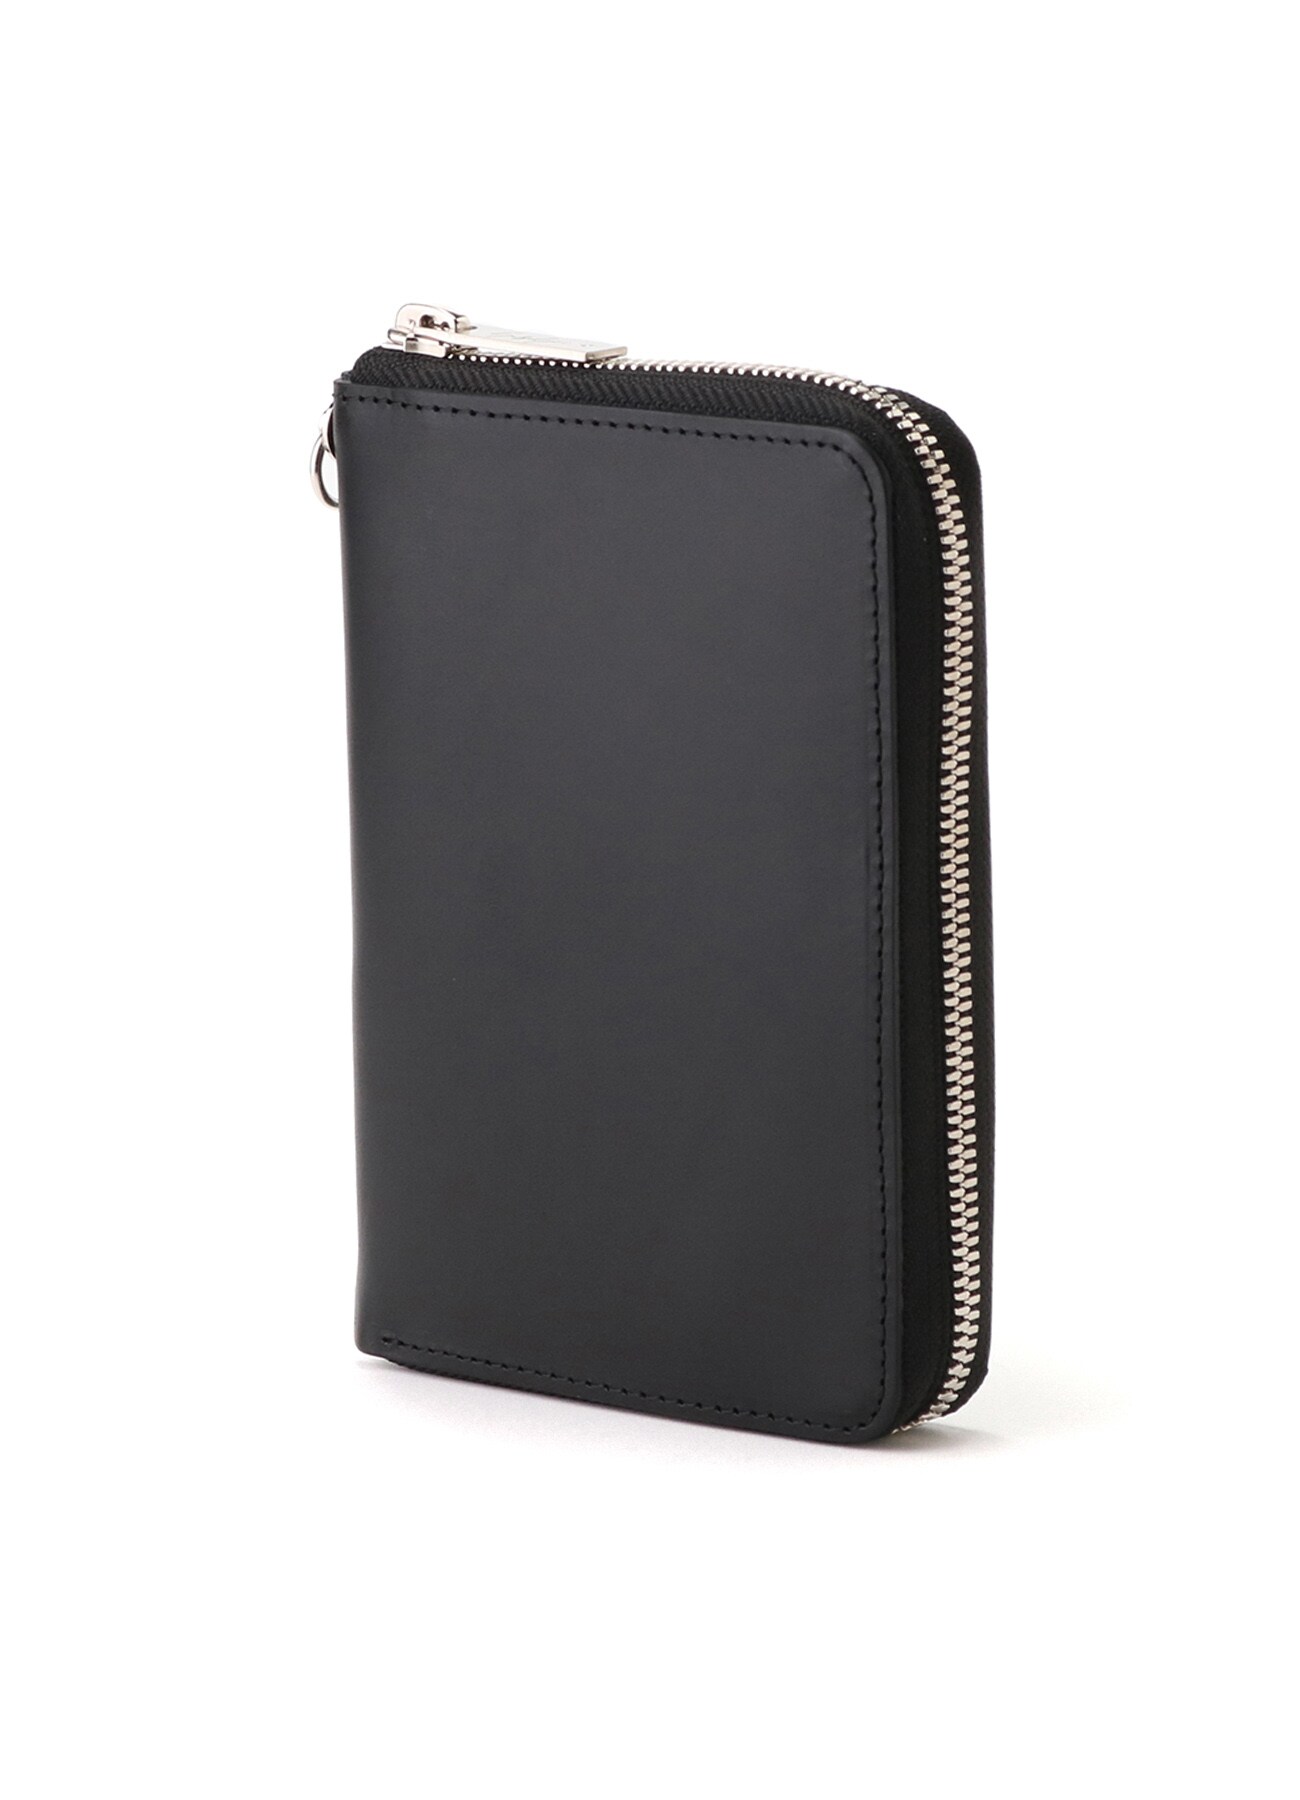 THICK NATURAL COW LEATHER ZIP WALLET S